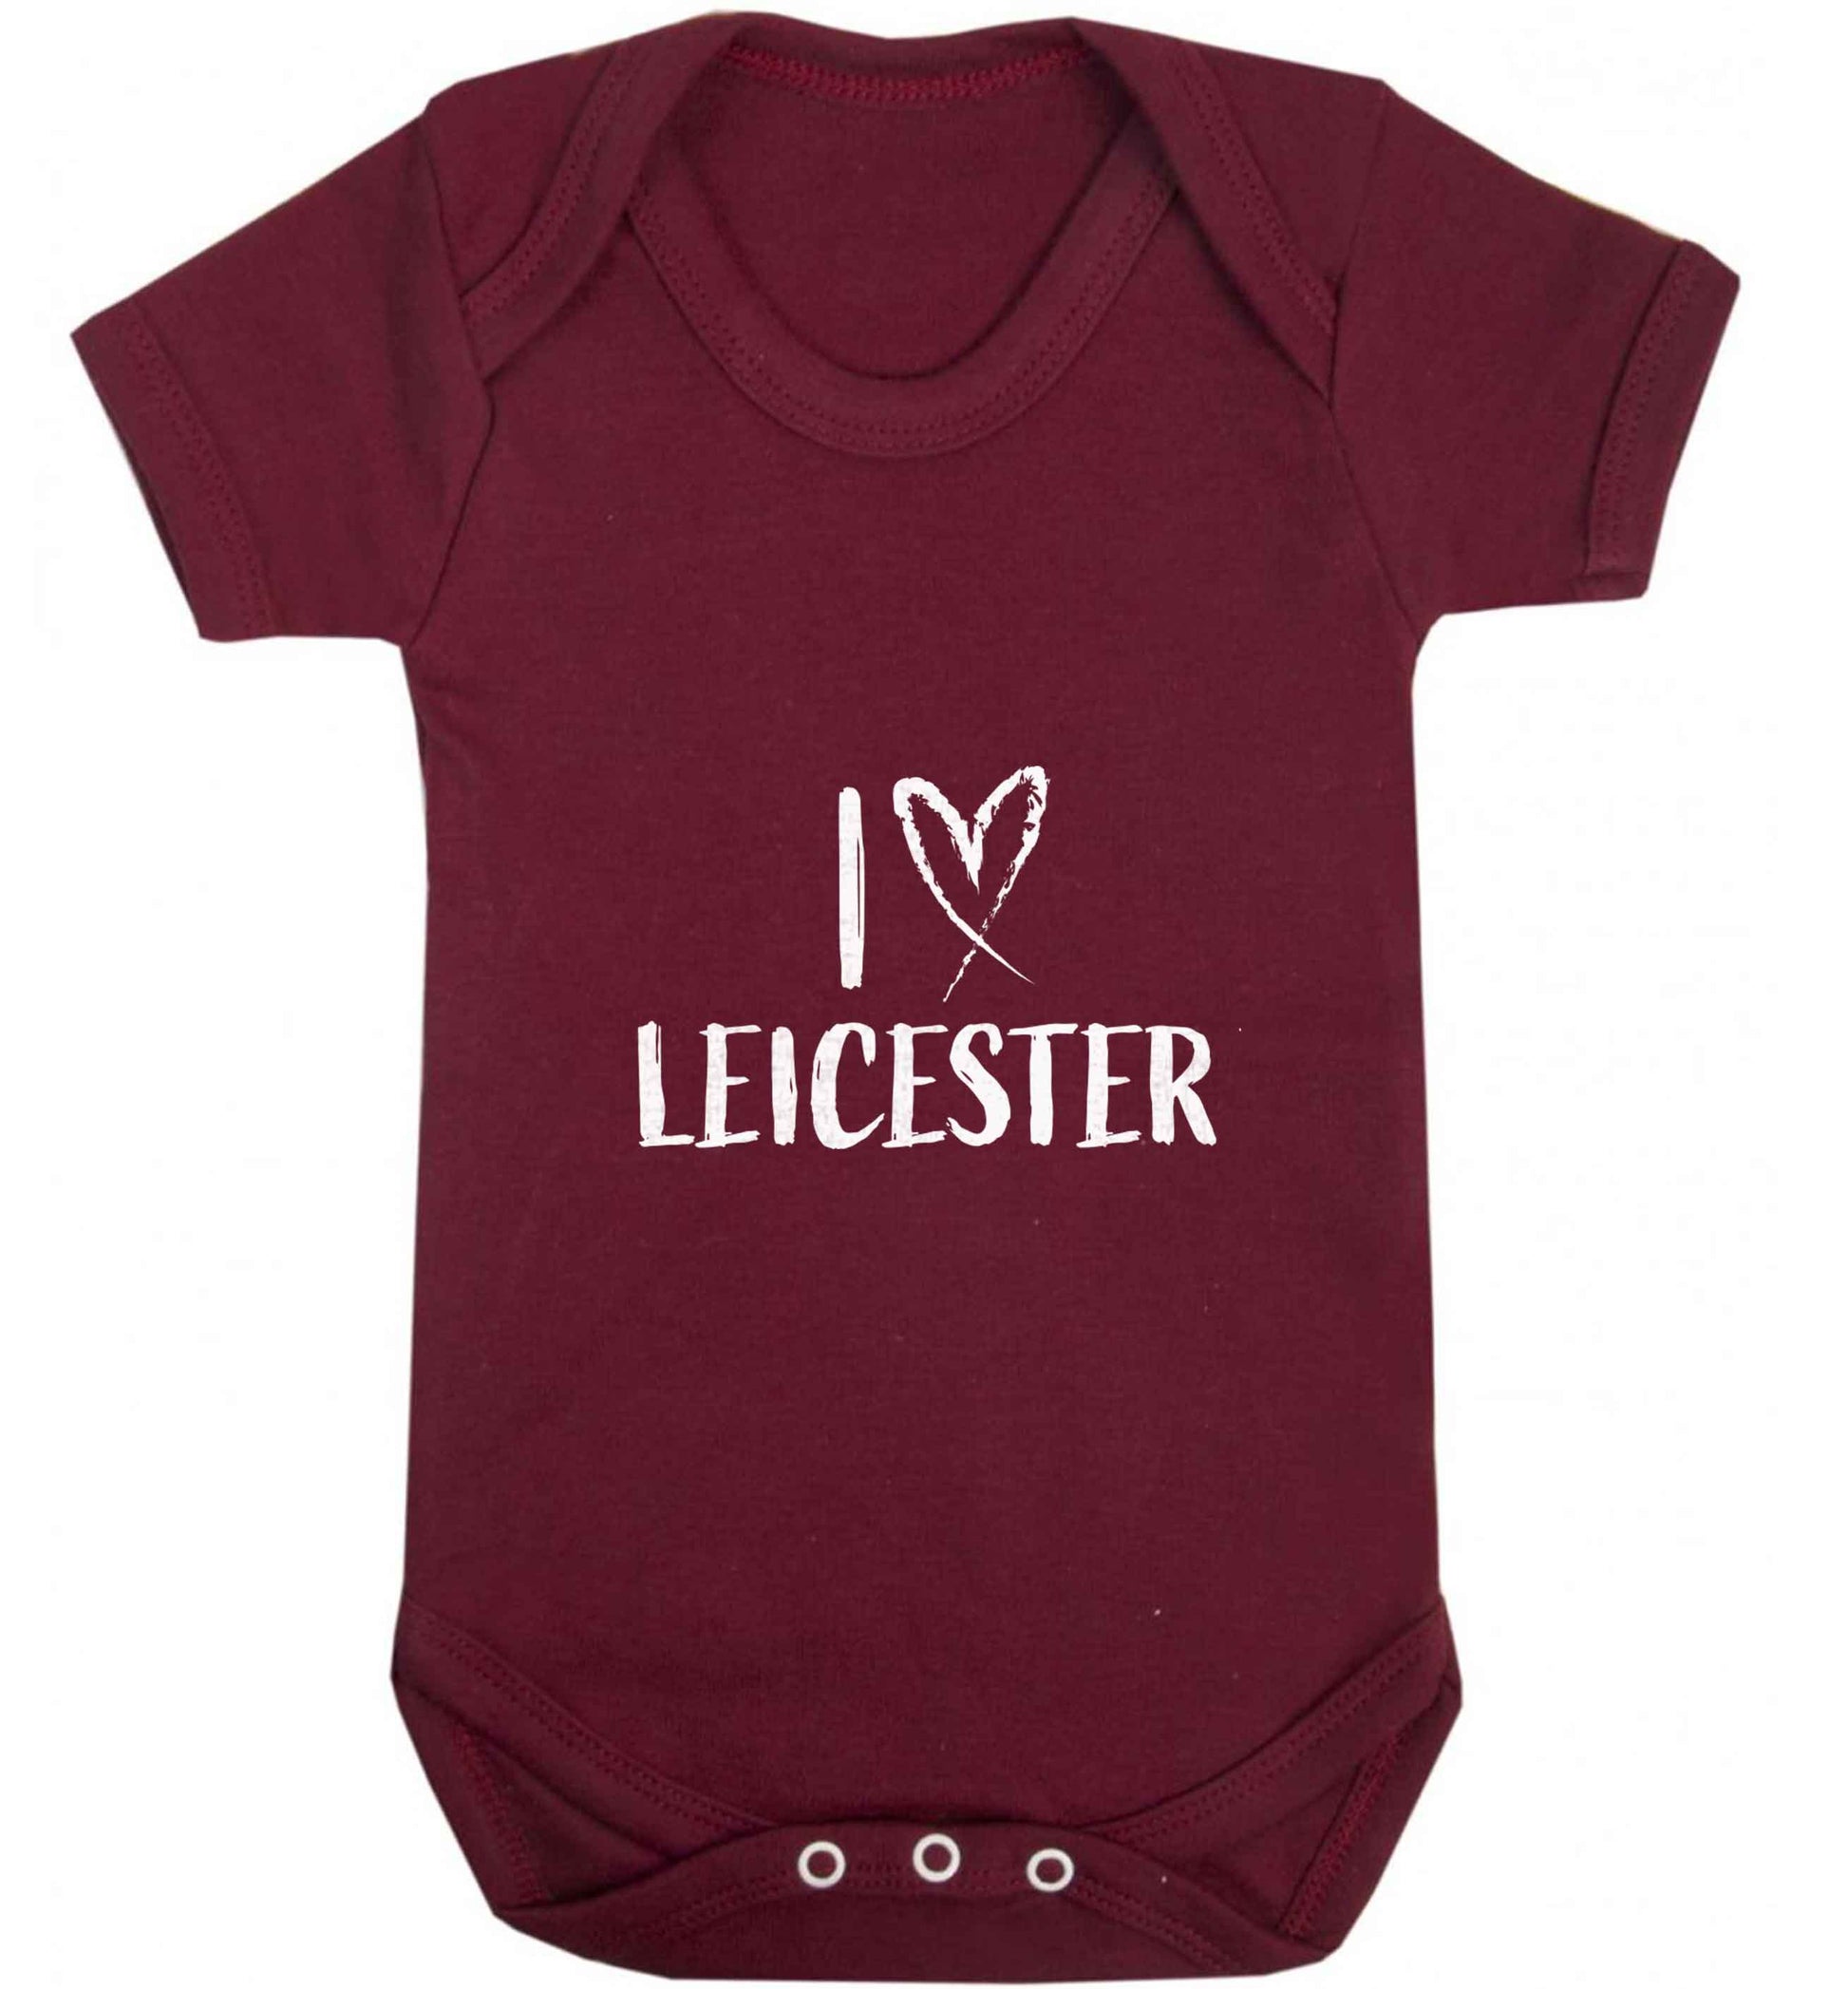 I love Leicester baby vest maroon 18-24 months